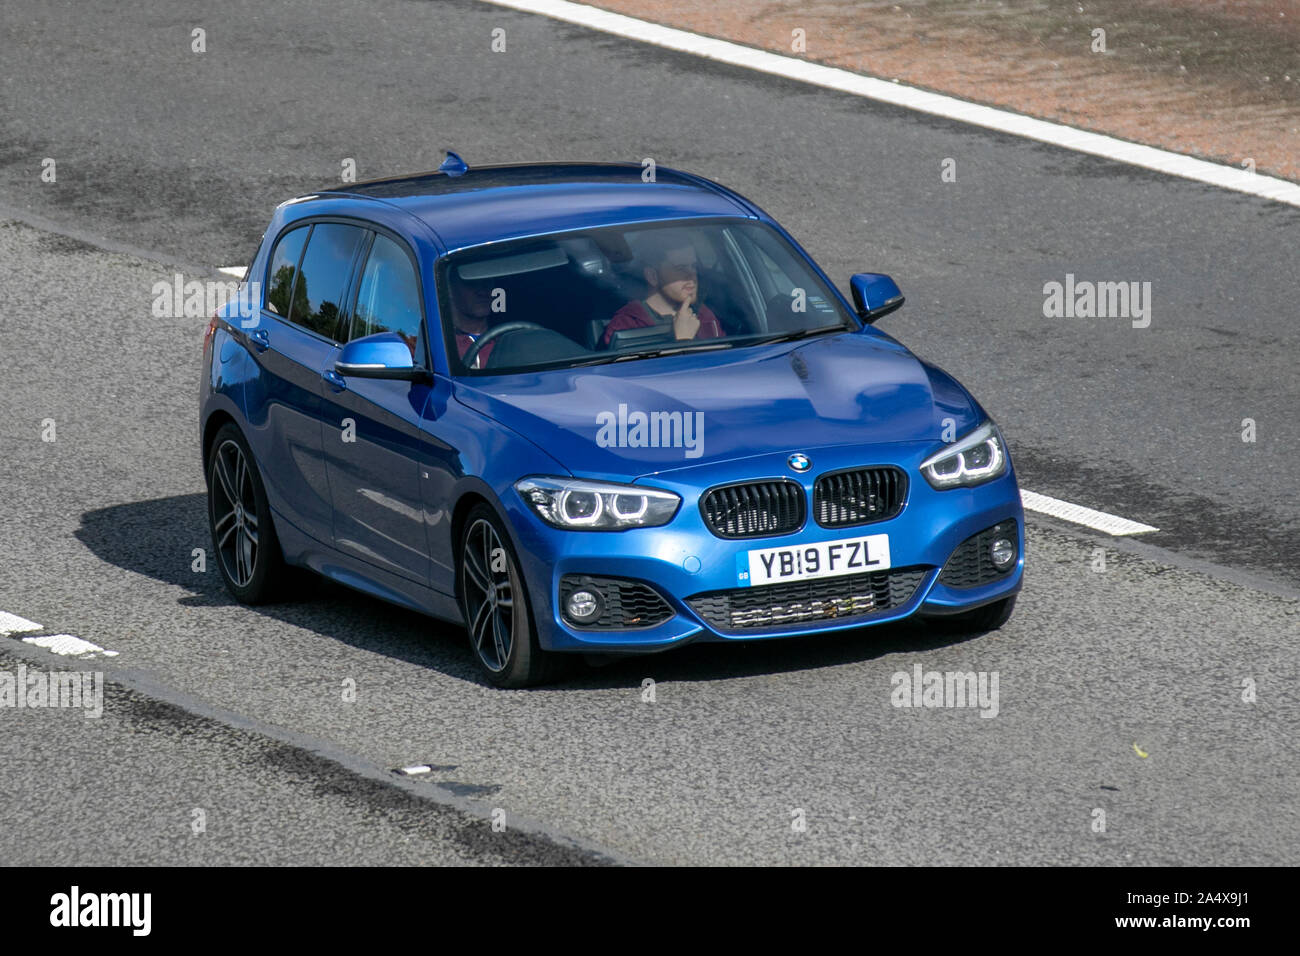 Bmw 118i M Sport High Resolution Stock Photography And Images Alamy